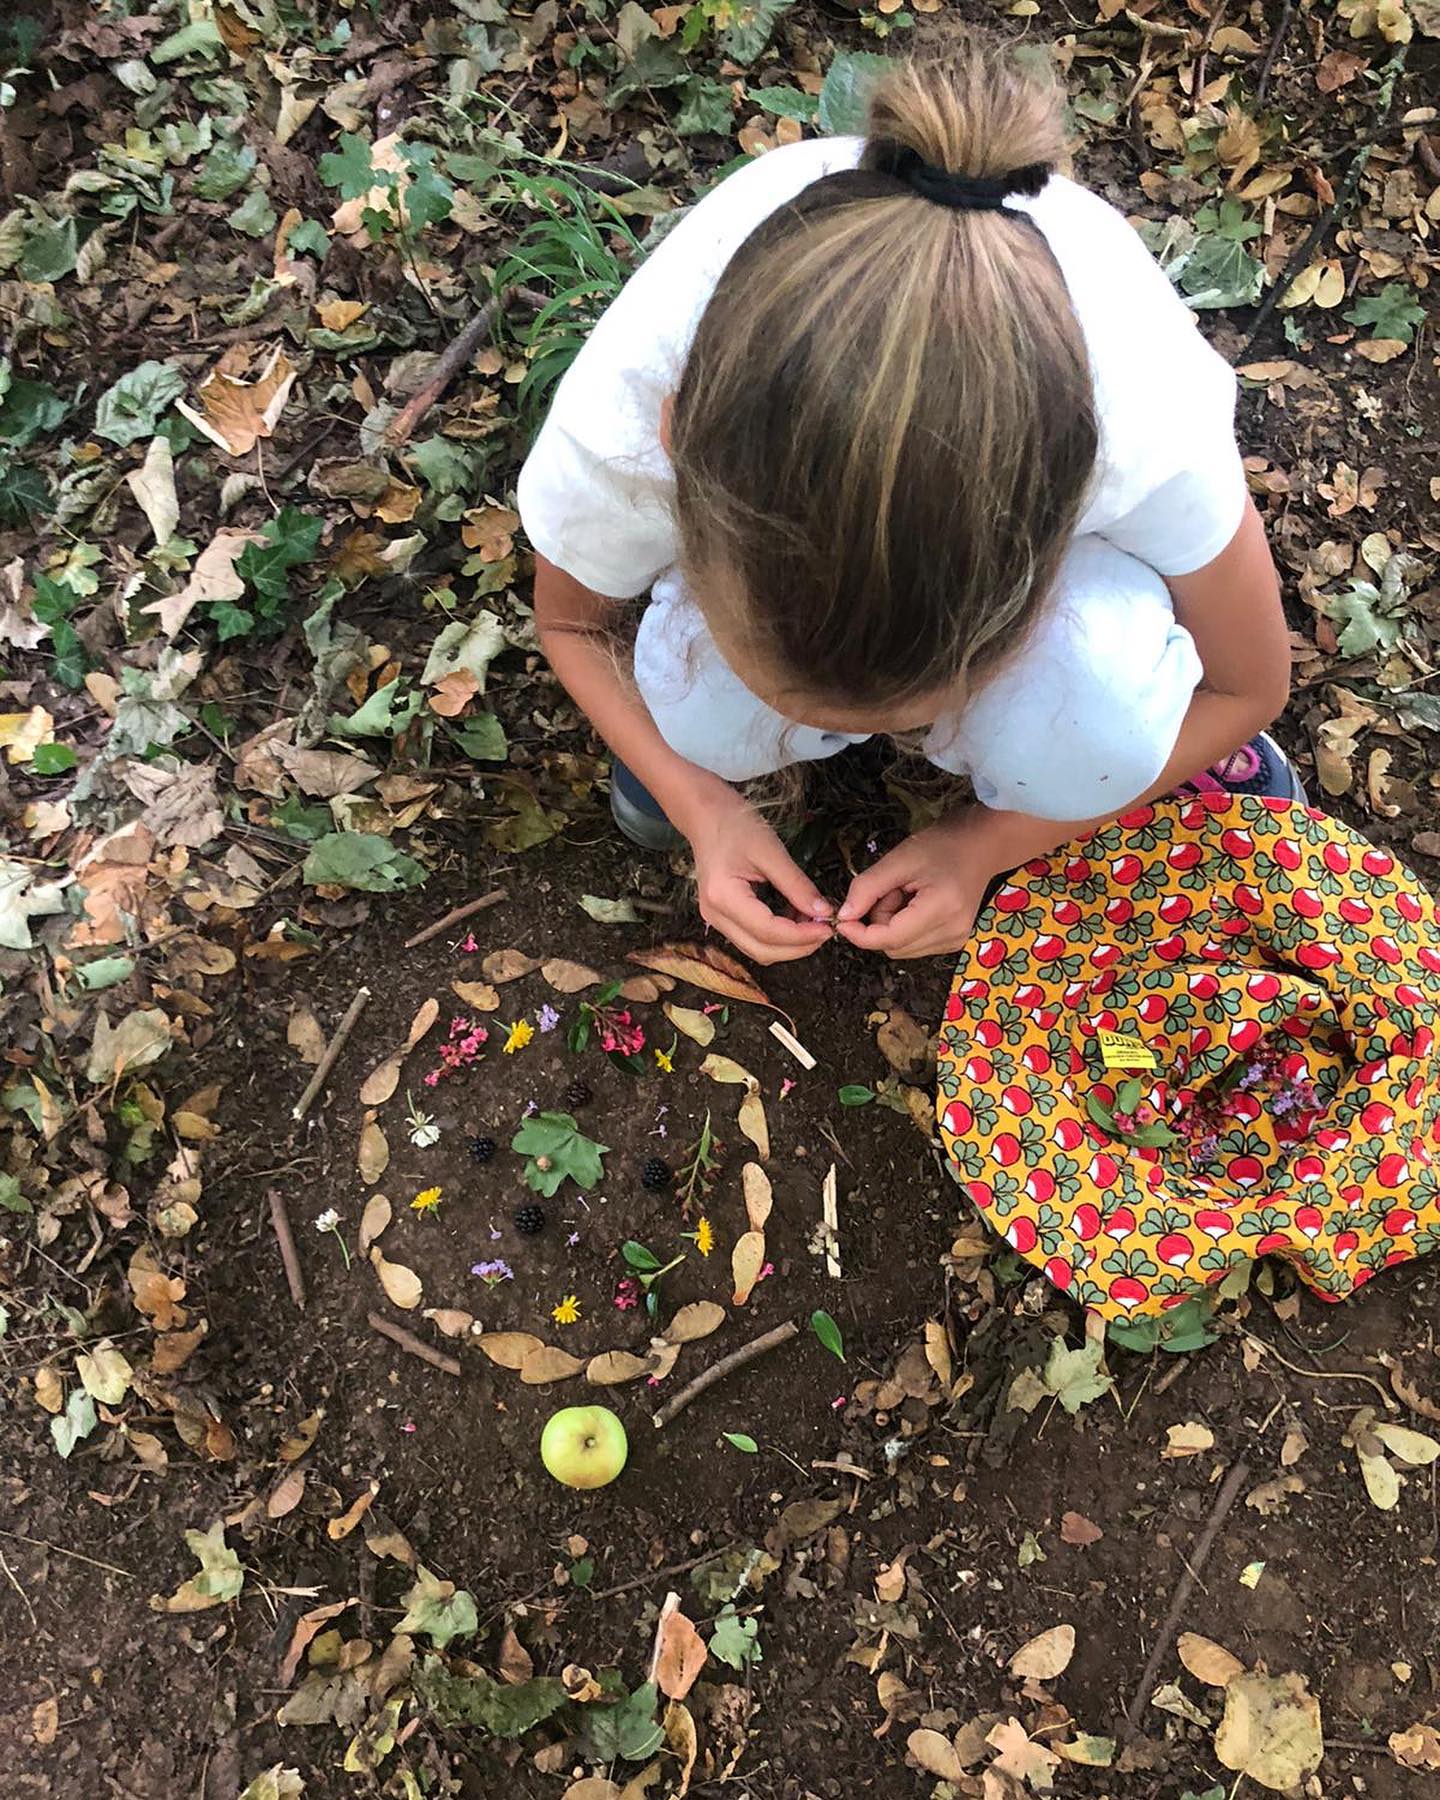 Yeti Dinner Plates - The Outdoors Project after school activities - autumn term 2022